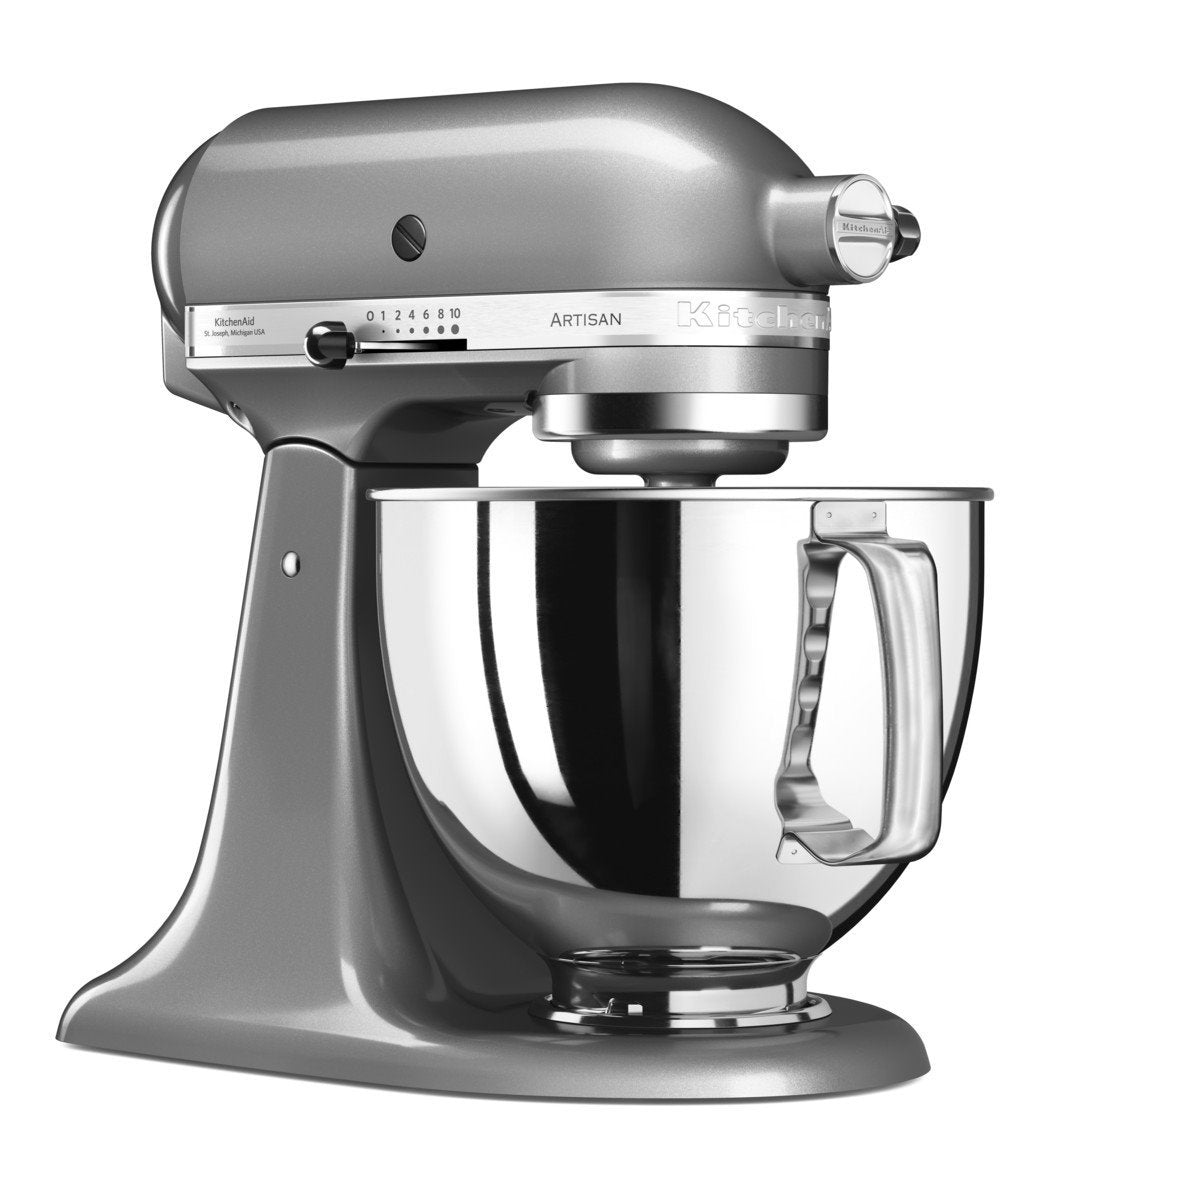 KitchenAid ™ Artisan Mixer 4.8L Contour Silver - Includes Wire Whisk, Dough Hook and Flat Beater (5KSM125BCU)